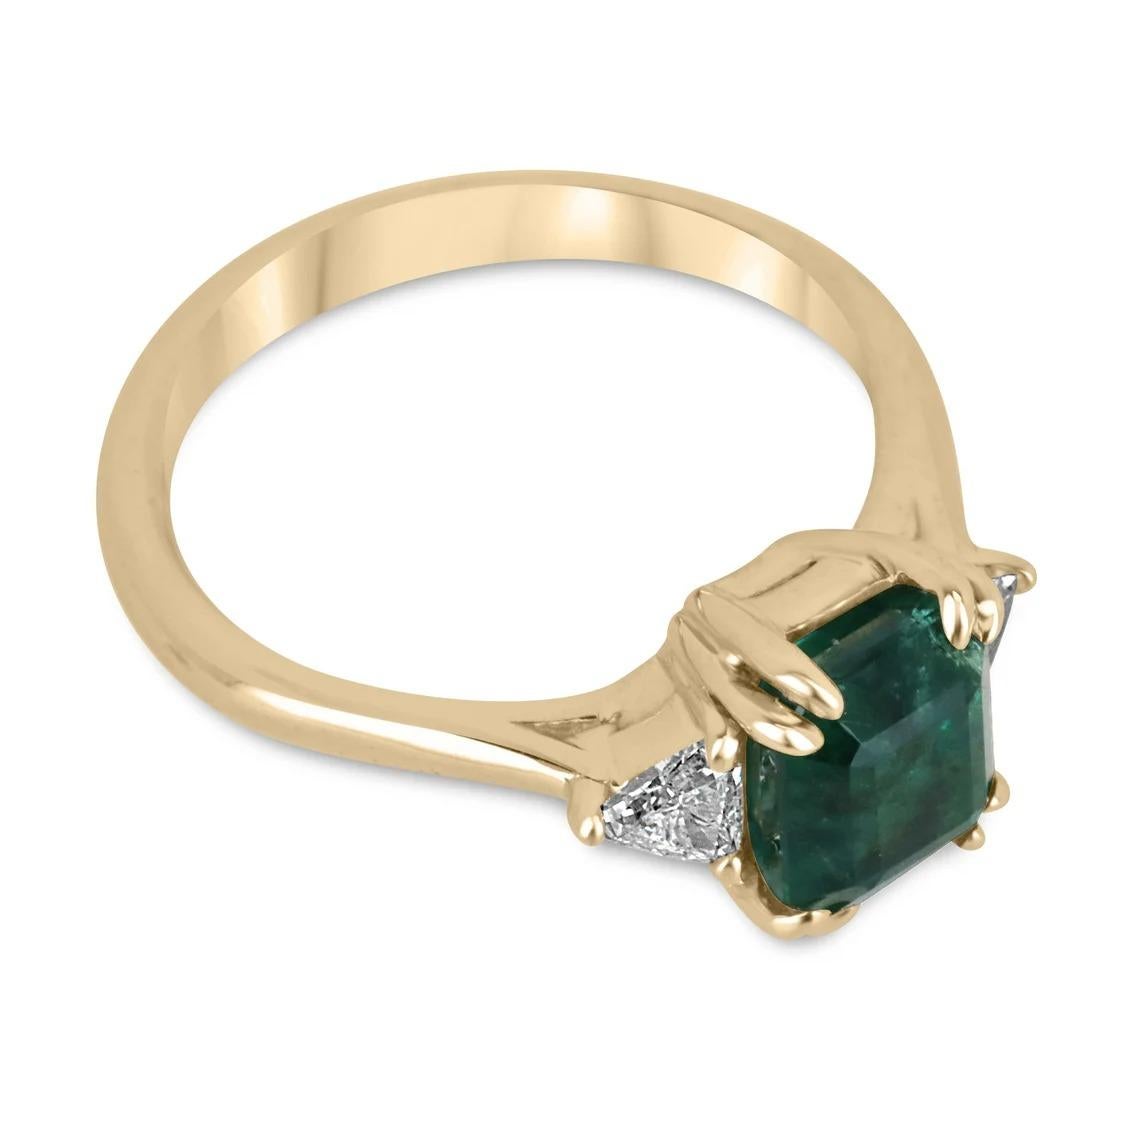 A classic emerald and diamond three-stone ring. This magnificent piece features a remarkable Asscher cut emerald from the origin of Zambia as the center stone. The gem displays a dark, desirable emerald green color with very good transparency and